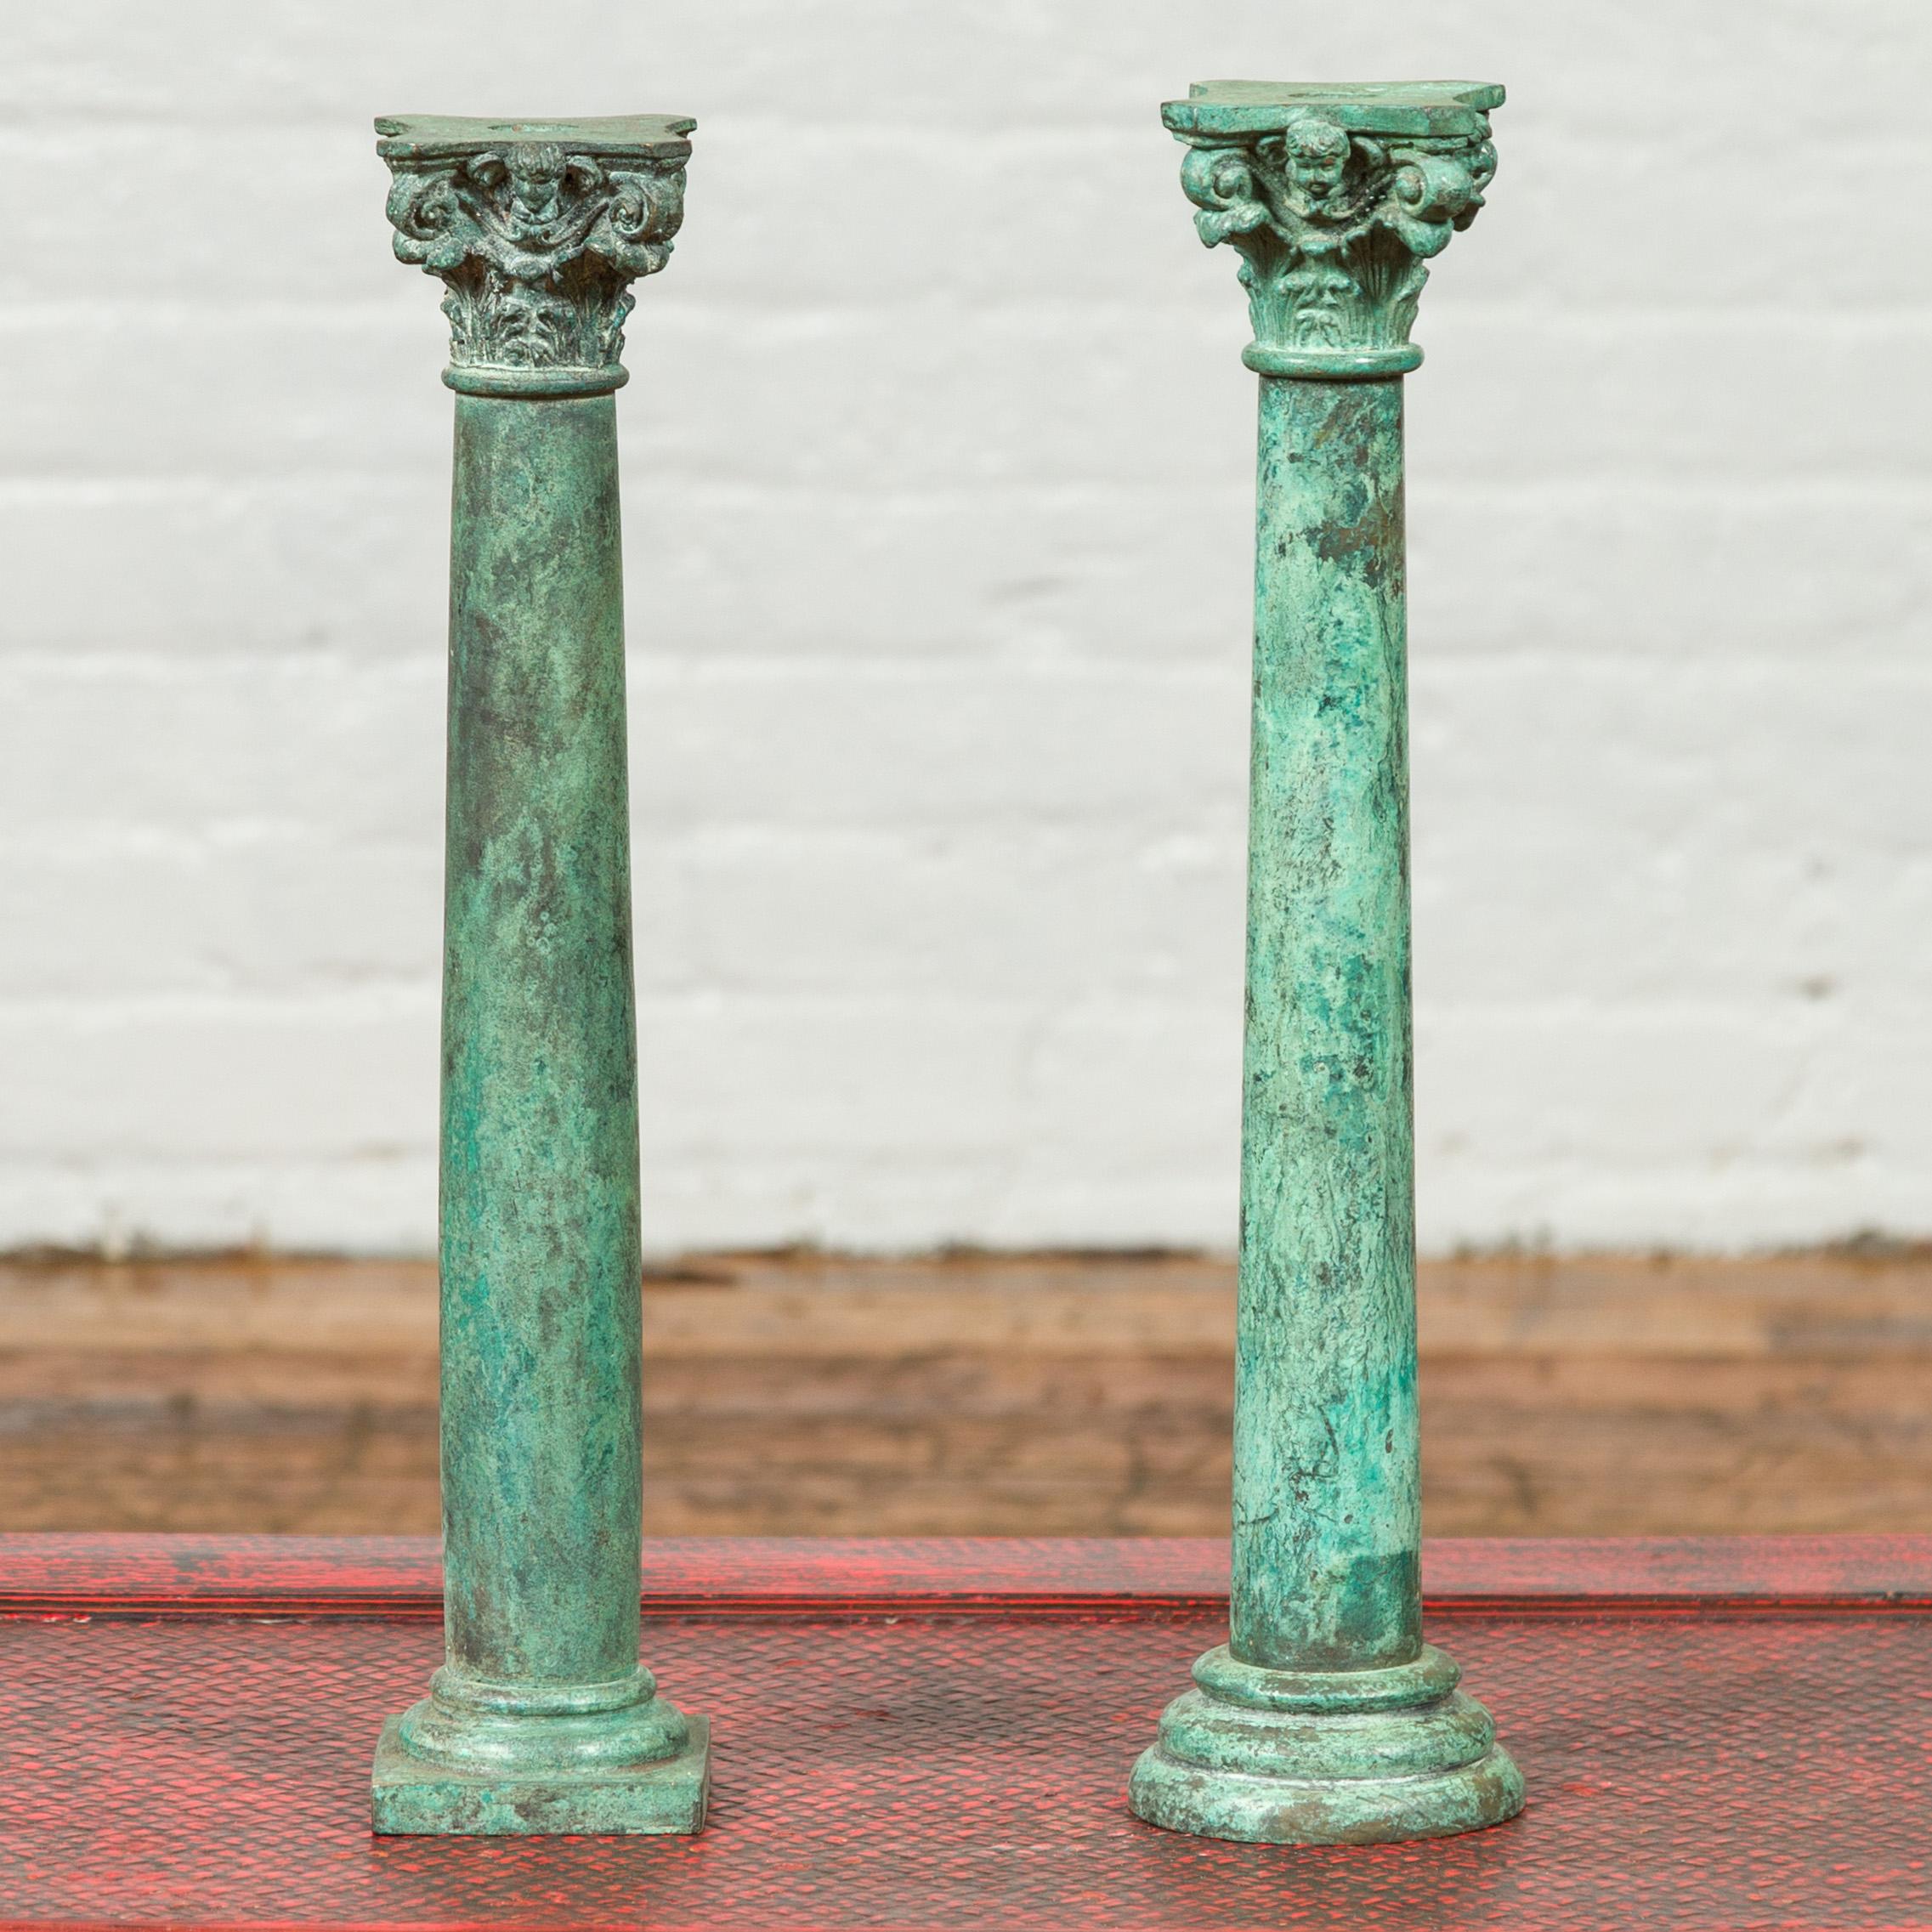 Two vintage bronze Corinthian column candlesticks with verdigris patina and cherub motifs, priced and sold individually. Crafted during the midcentury period, each of these two candlesticks features a column with entasis and verdigris patina. Each